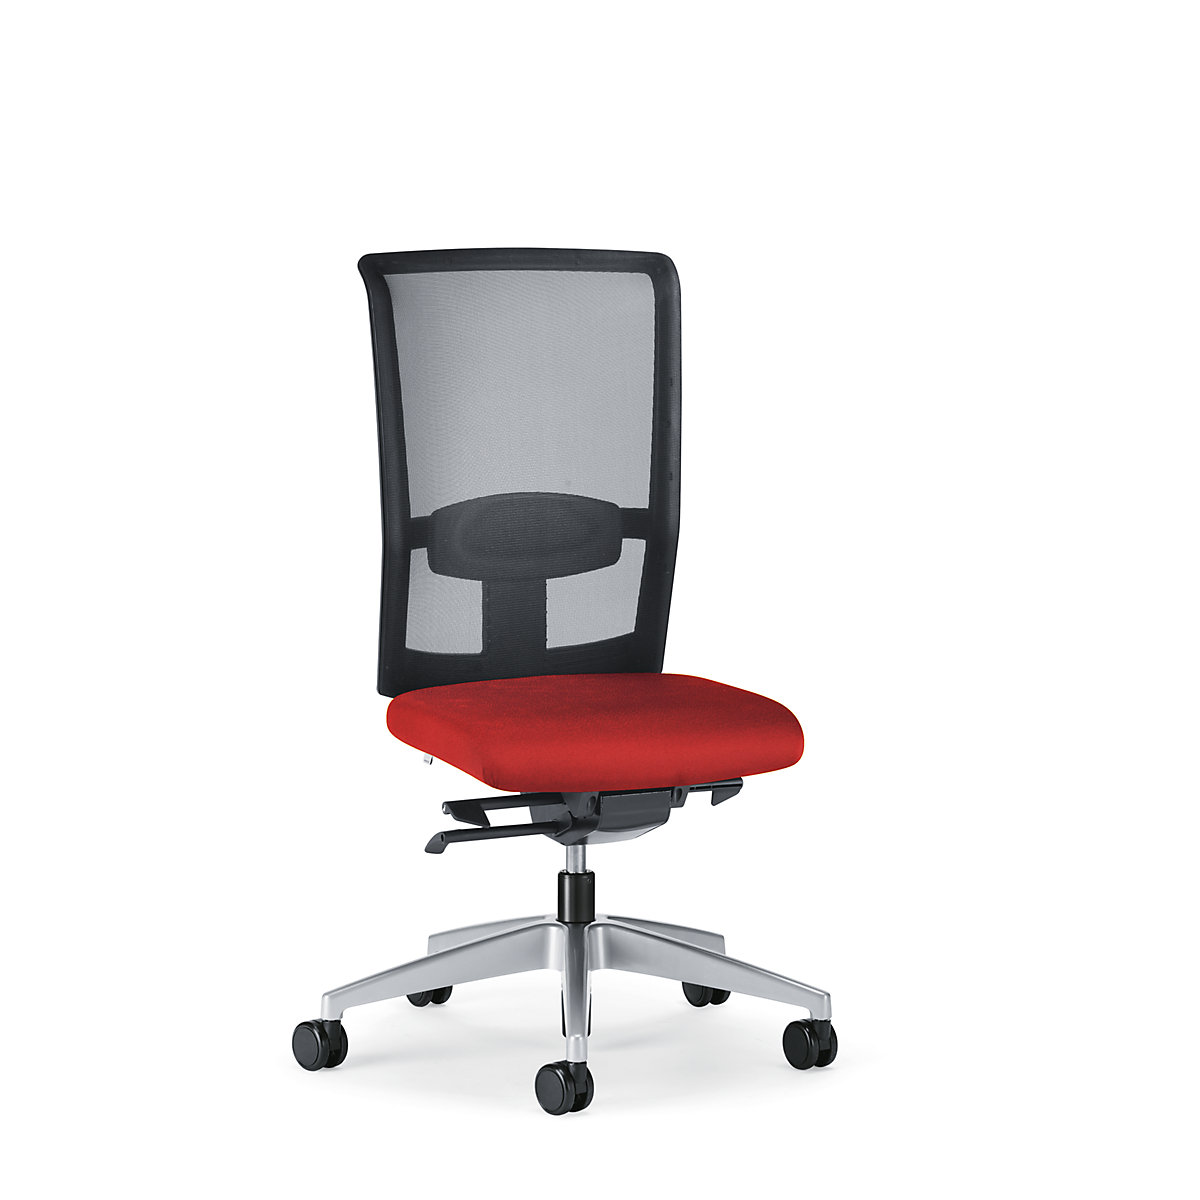 GOAL AIR office swivel chair, back rest height 545 mm – interstuhl, brilliant silver frame, with hard castors, flame red, seat depth 410 mm-4